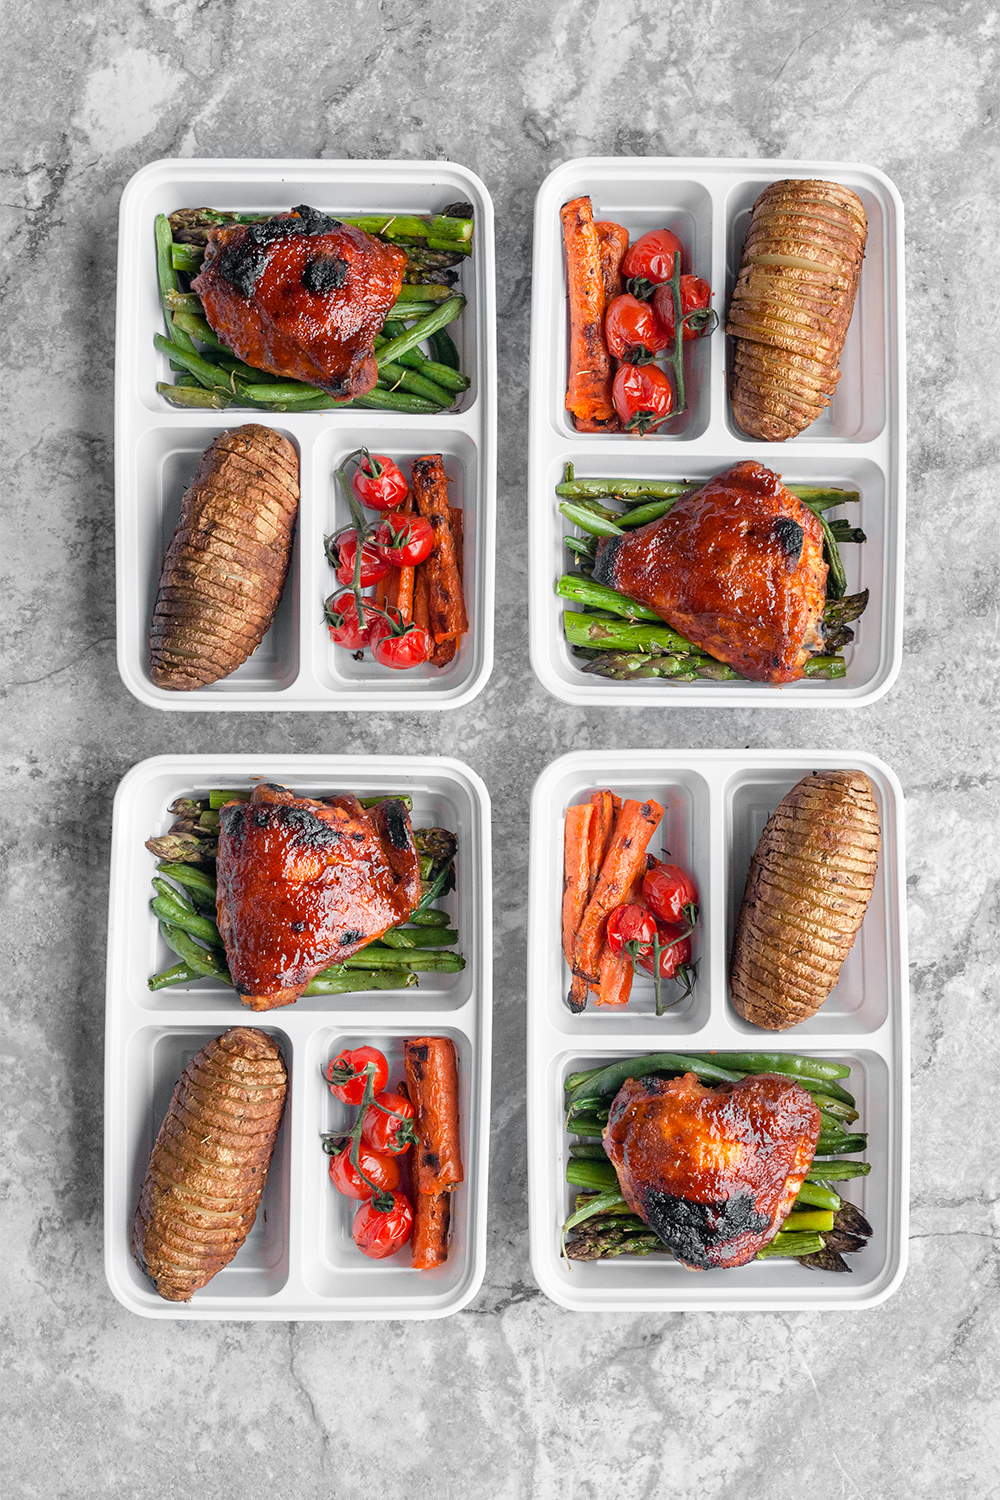 Oven Baked BBQ Chicken and Veggies Meal Prep